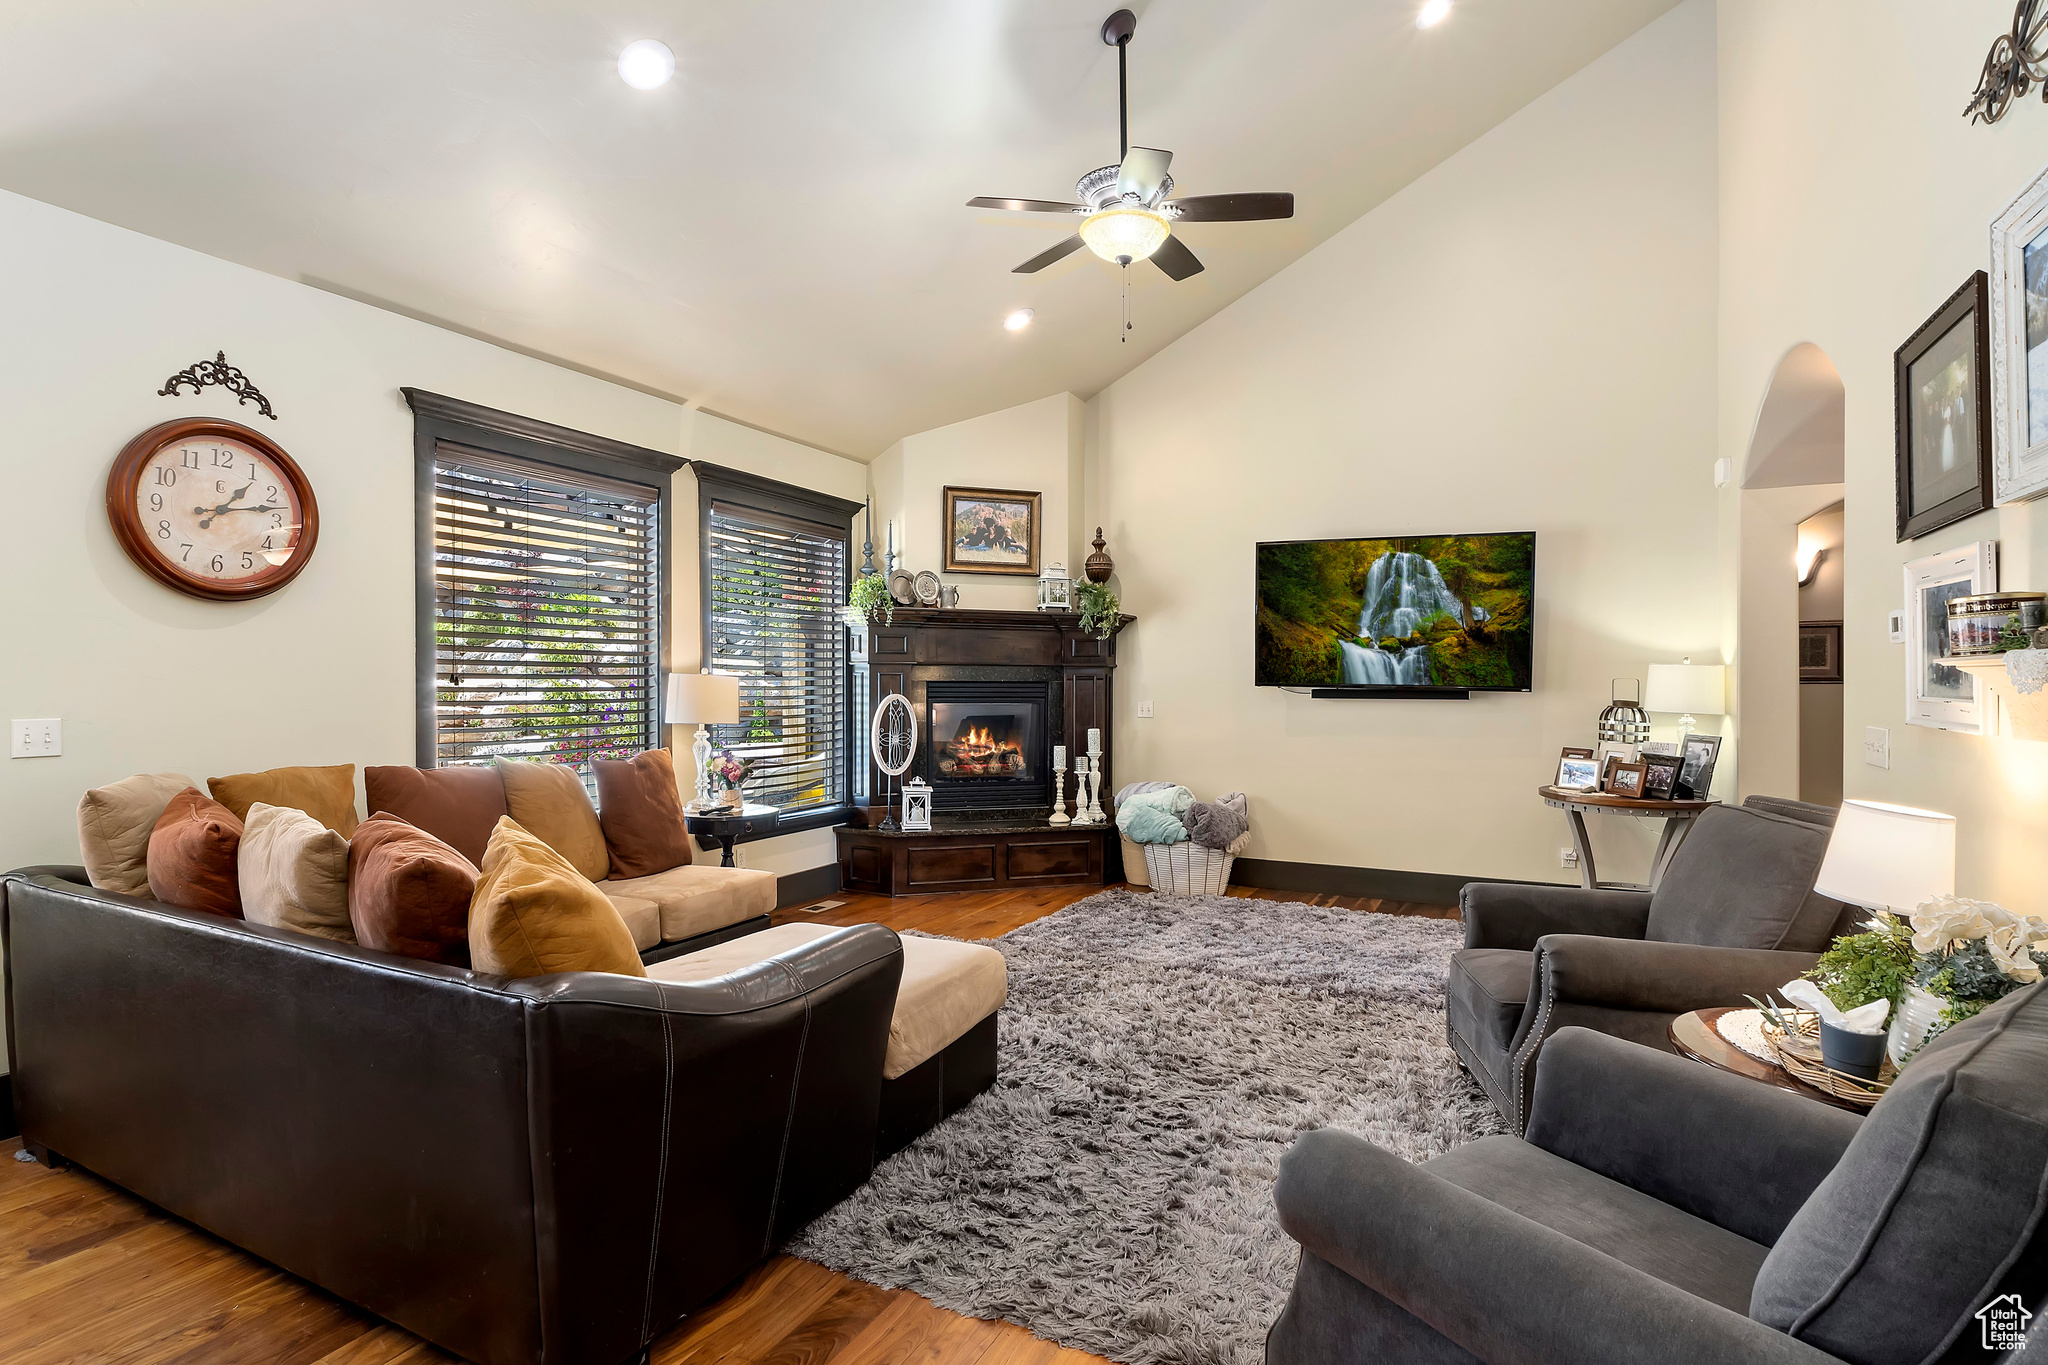 Living room featuring high vaulted ceiling, dark wood-type flooring, and ceiling fan